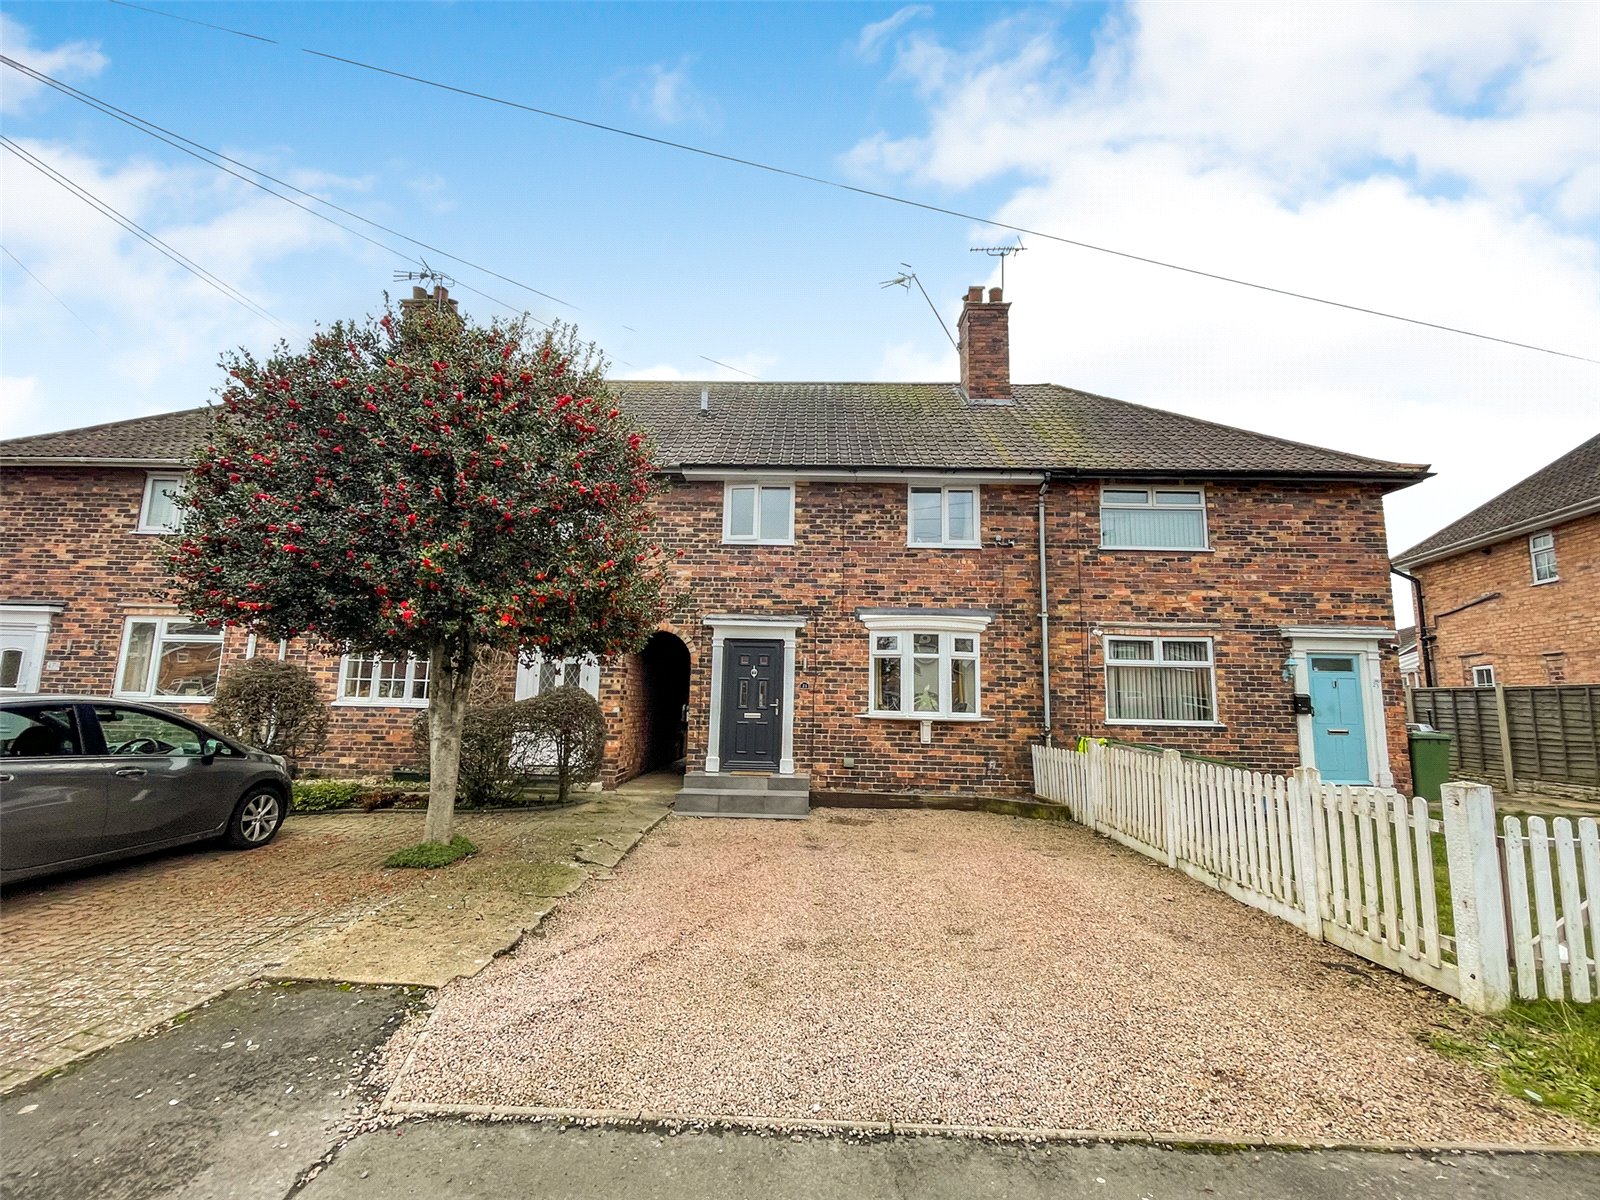 Worth Crescent, Stourport-On-Severn, Worcestershire, DY13